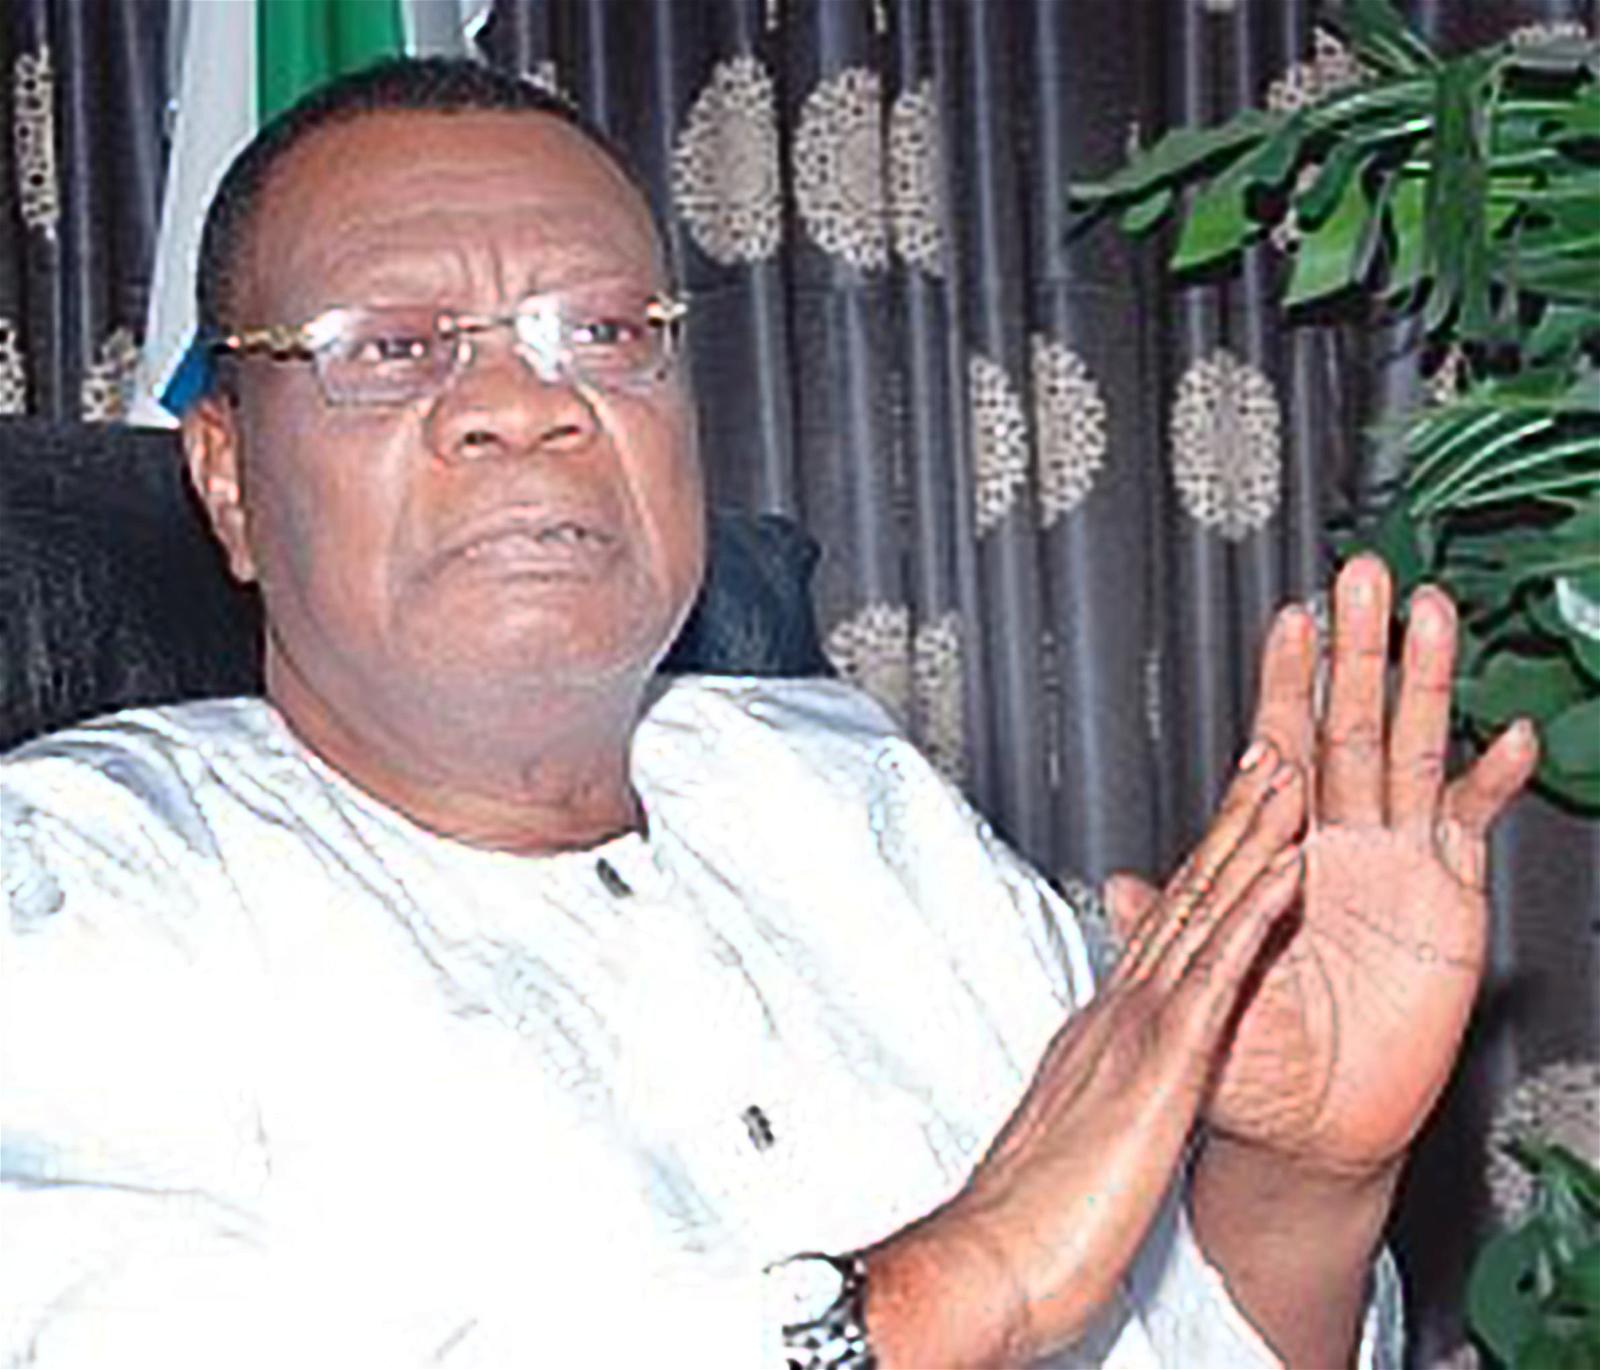 Why elected must heed peoples’ cry — CAC Prophet, Abiara